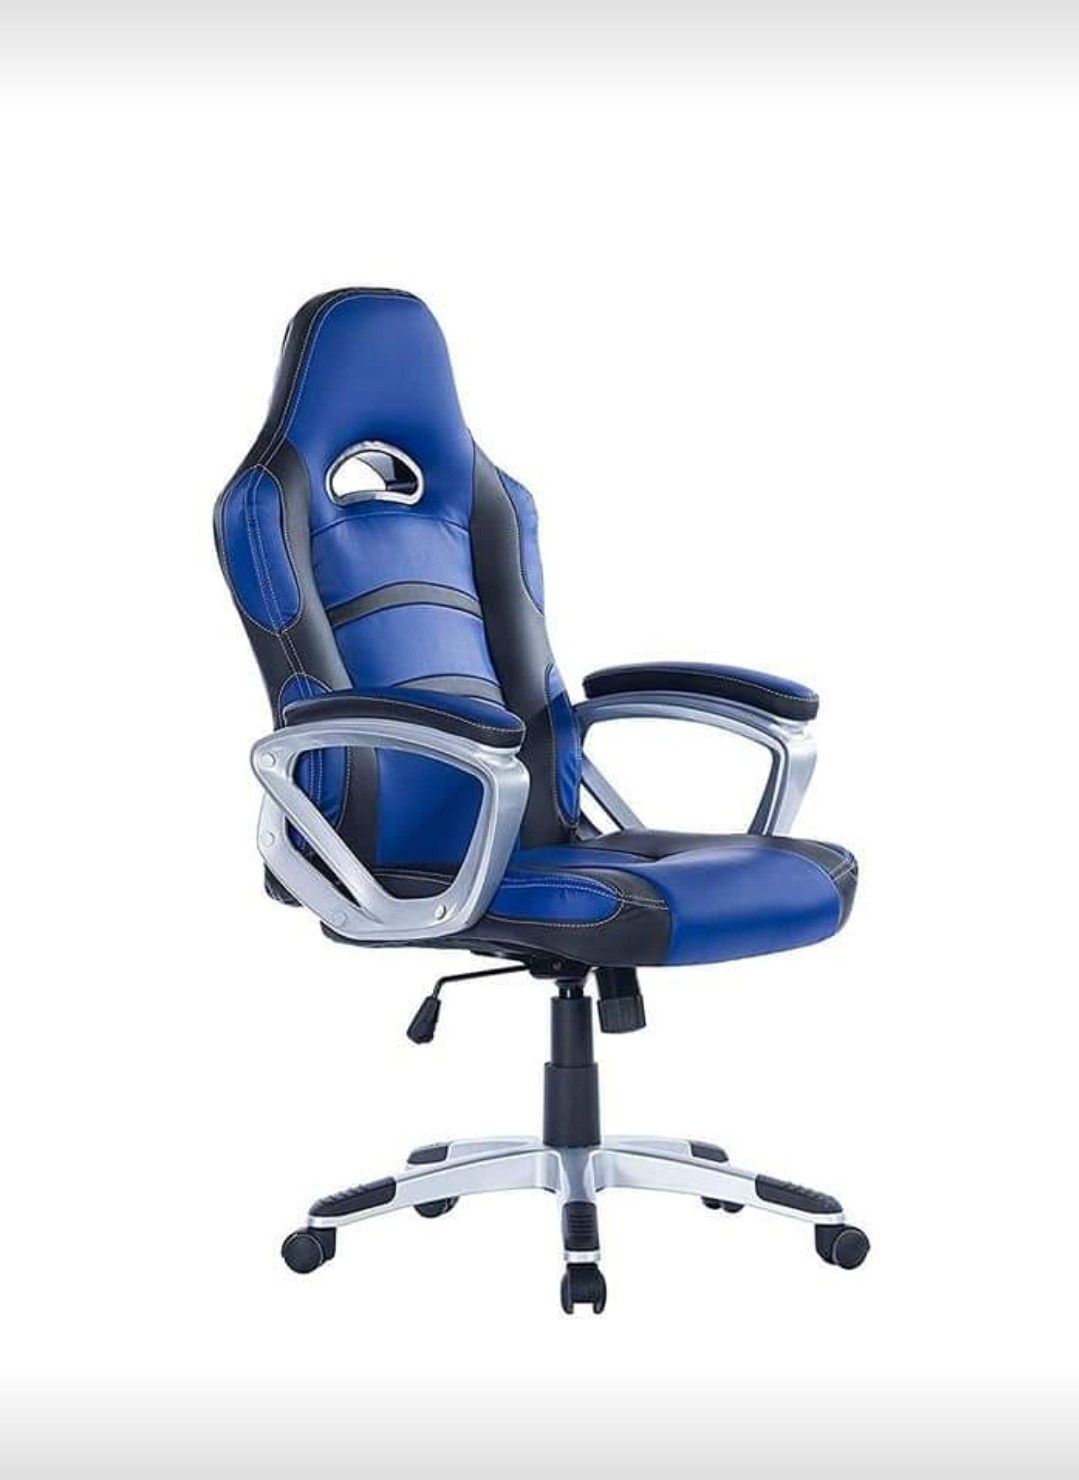 NEW Gaming Chair Executive Office Chair PU Leather Computer Desk Chair - Pick up 33183